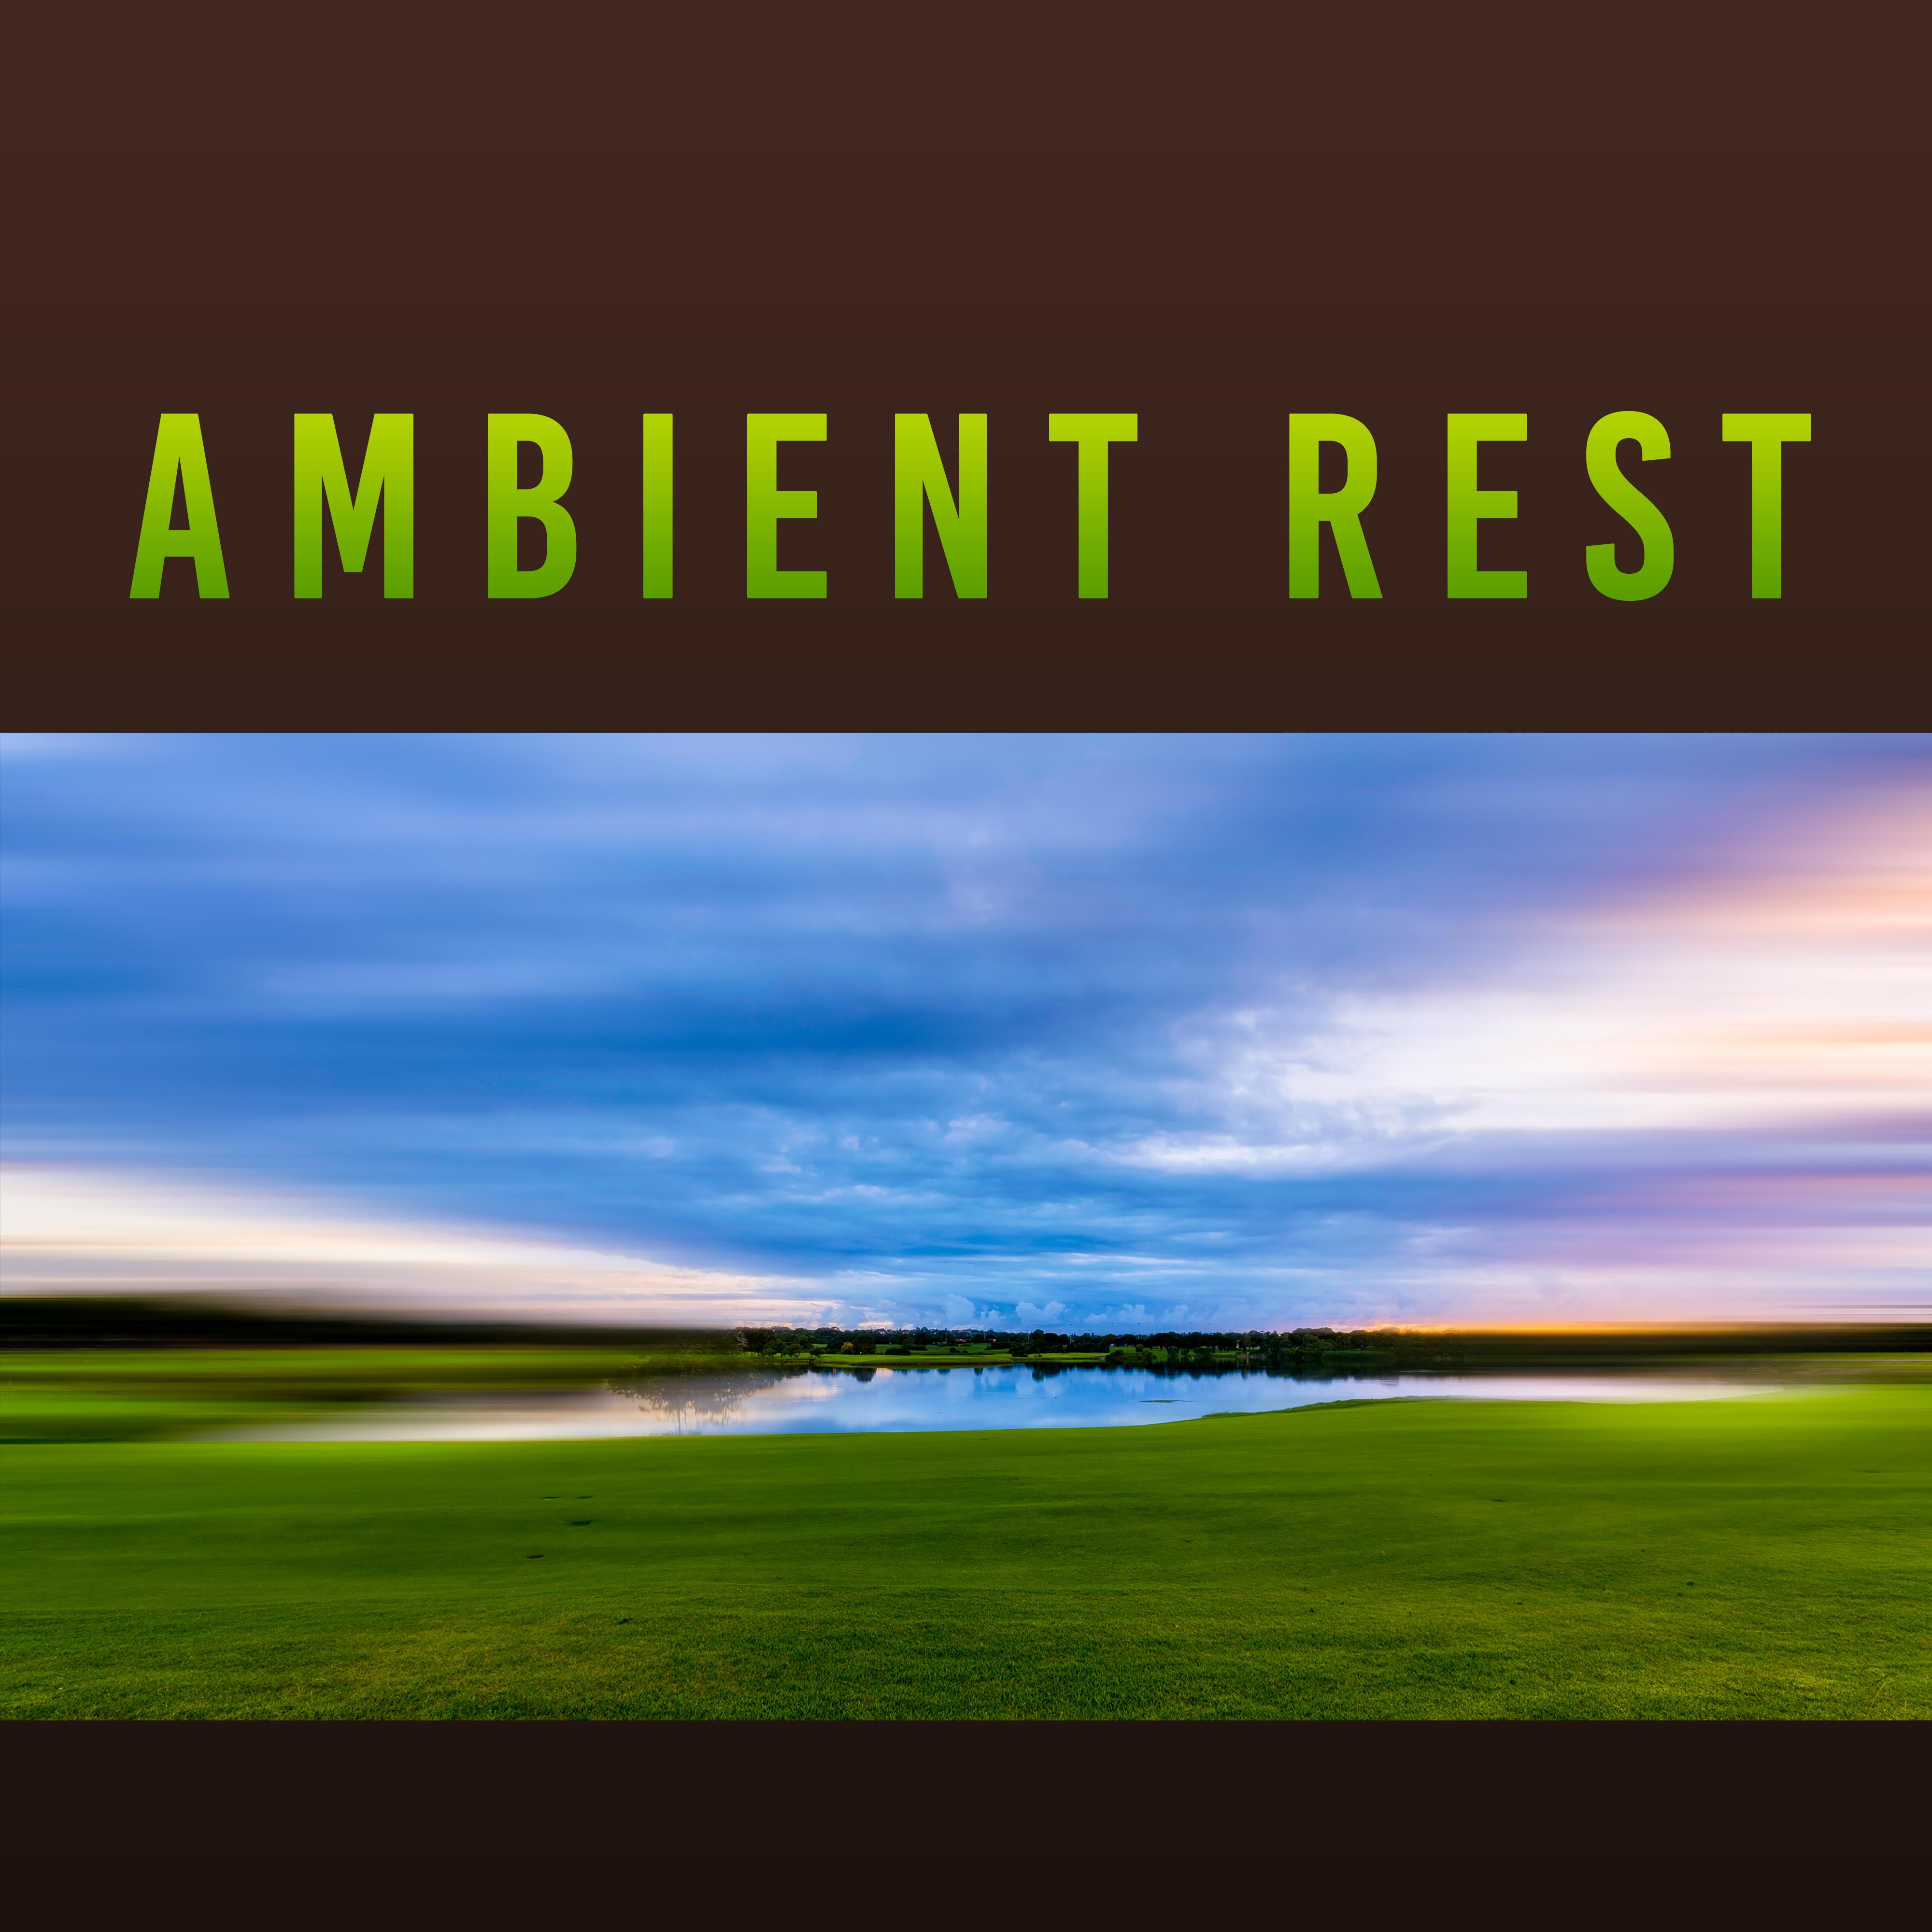 Ambient Rest  Relaxing Music, Nature Sounds, Calming Music, Deep Relax Music, Reduce Anxiety  Stress